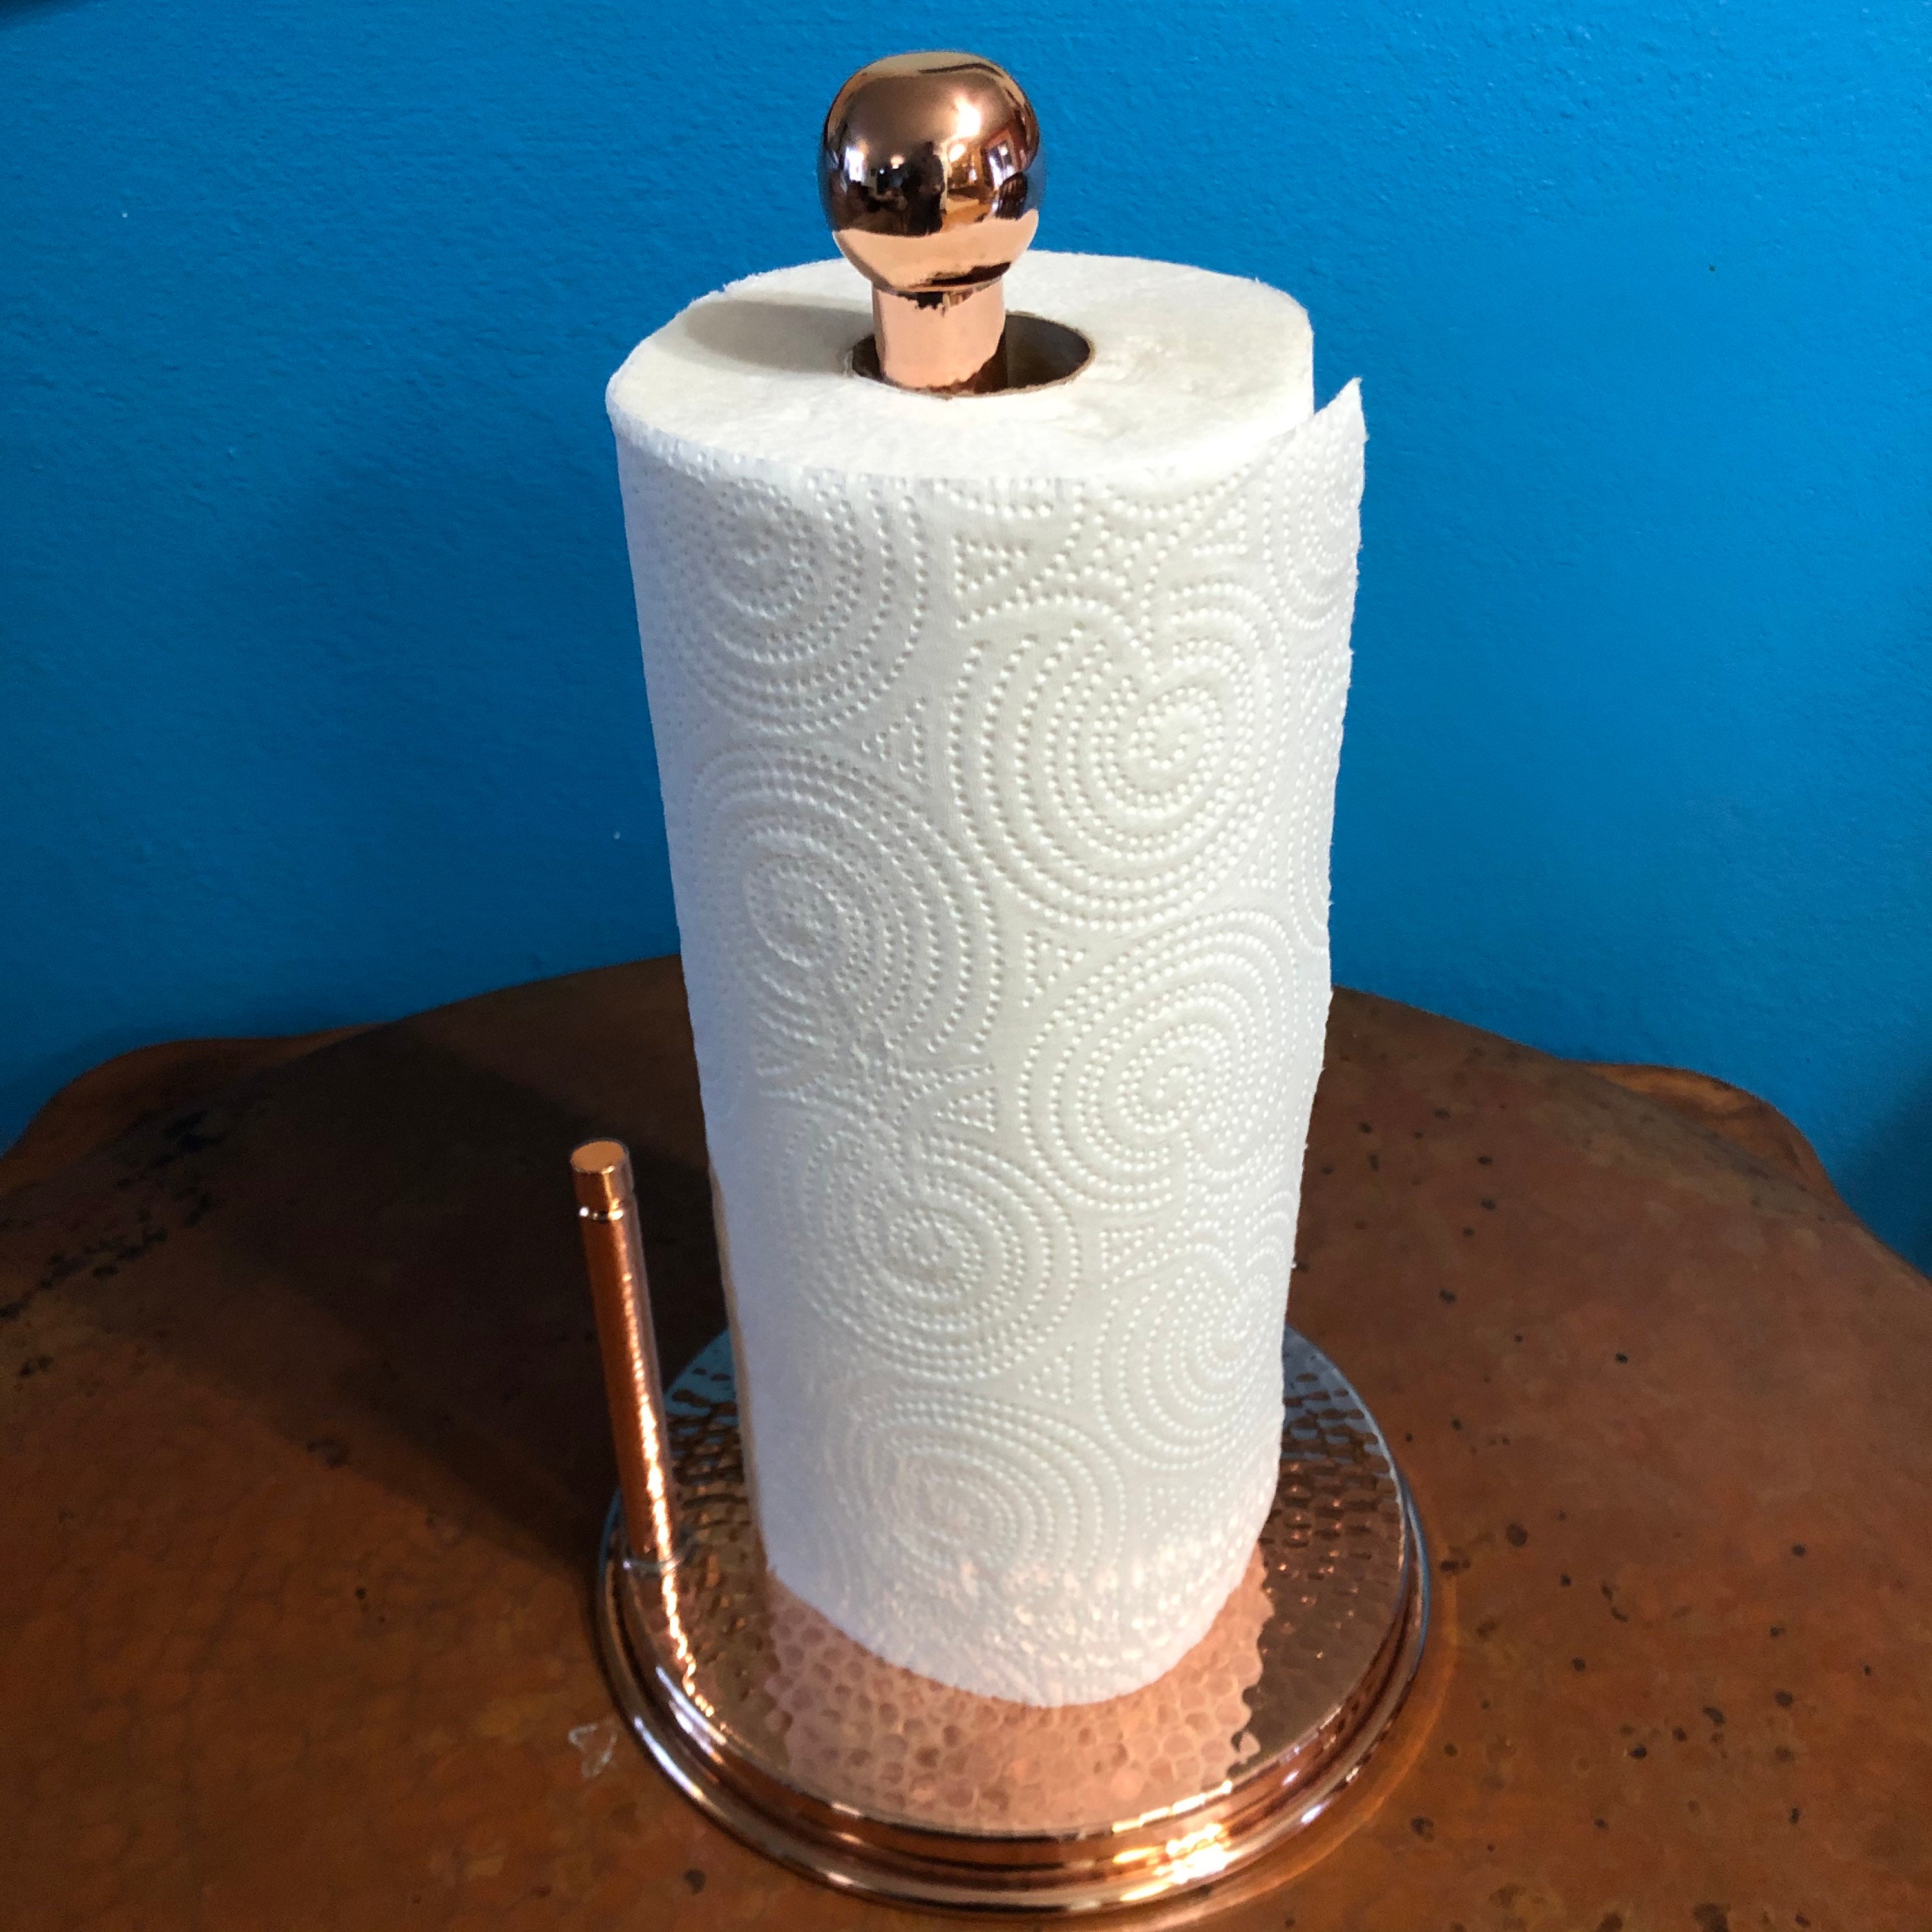 diy copper + wood paper towel holder – almost makes perfect